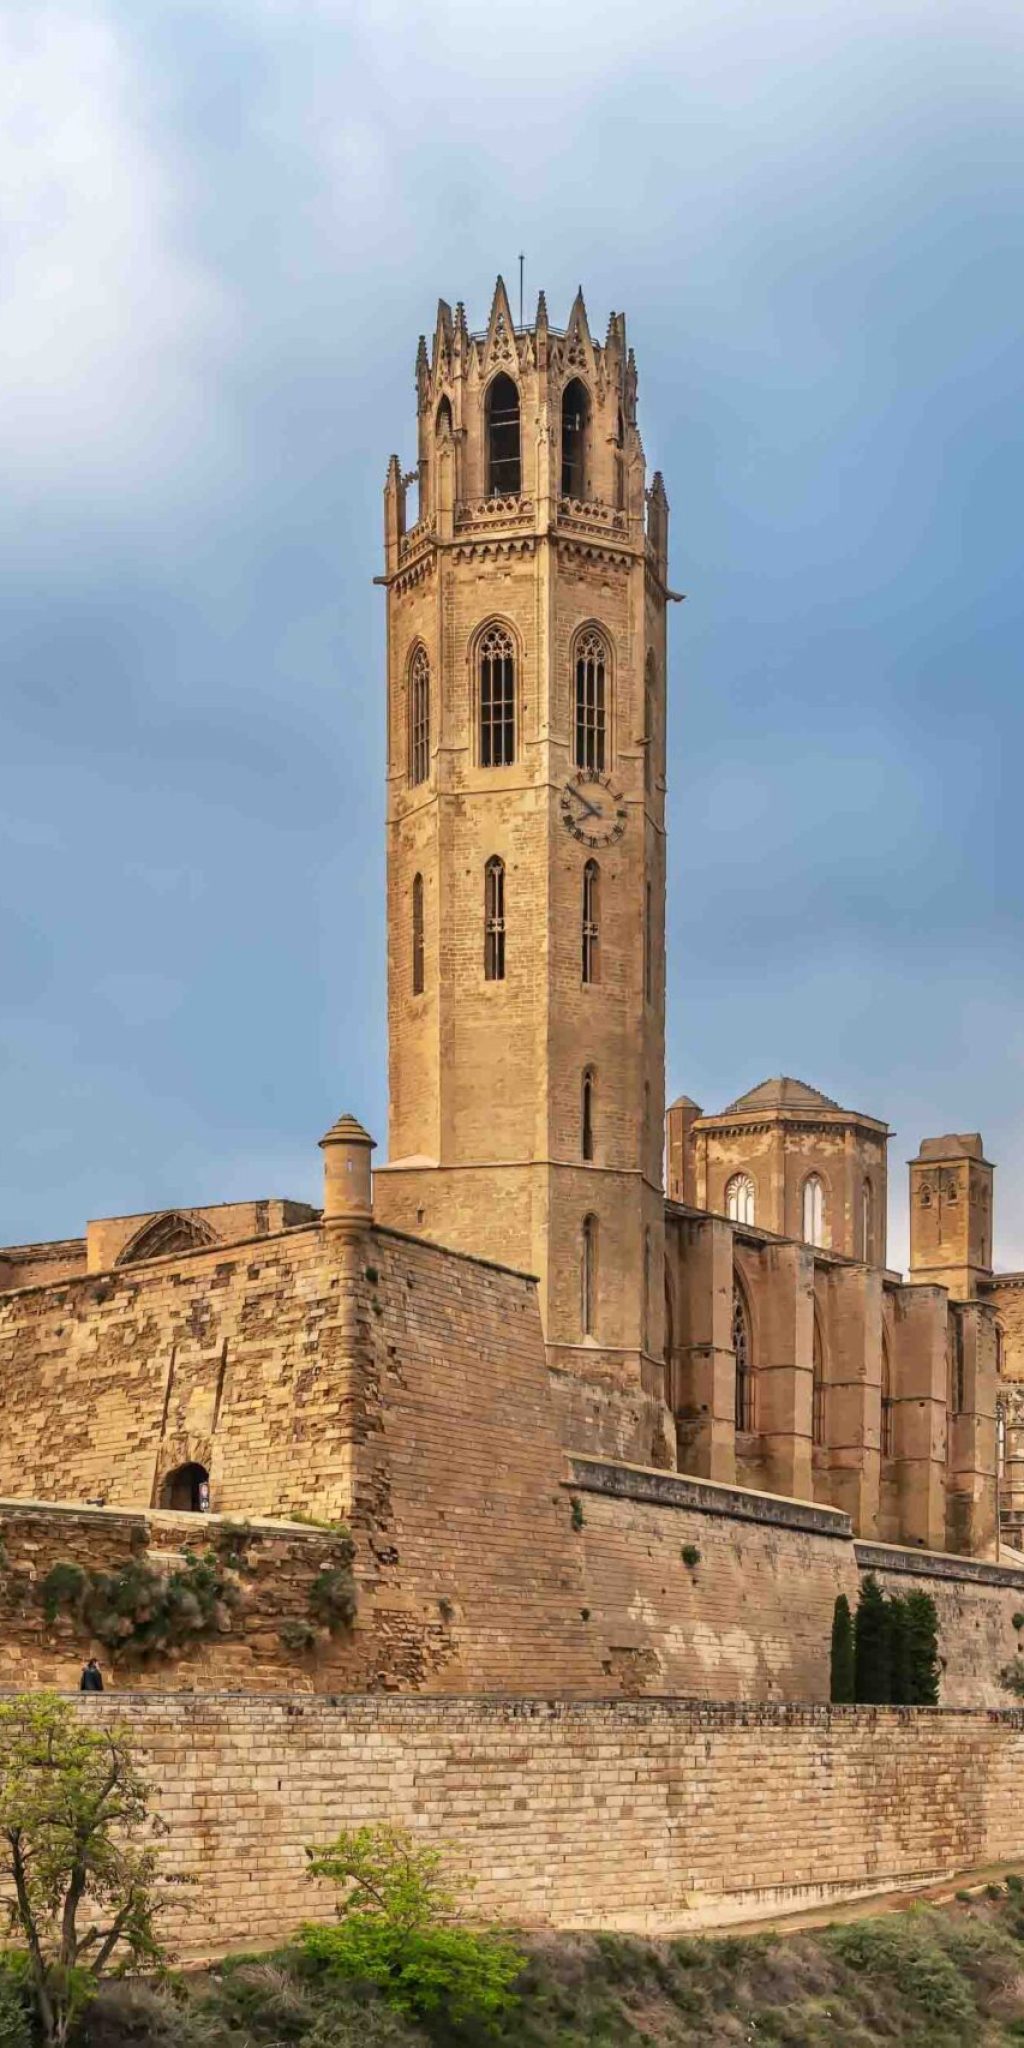 Cathedral of St. Mary of La Seu Vella is the former cathedral church of the Roman Catholic Diocese of Lleida in Lleida, Catalonia, Spain